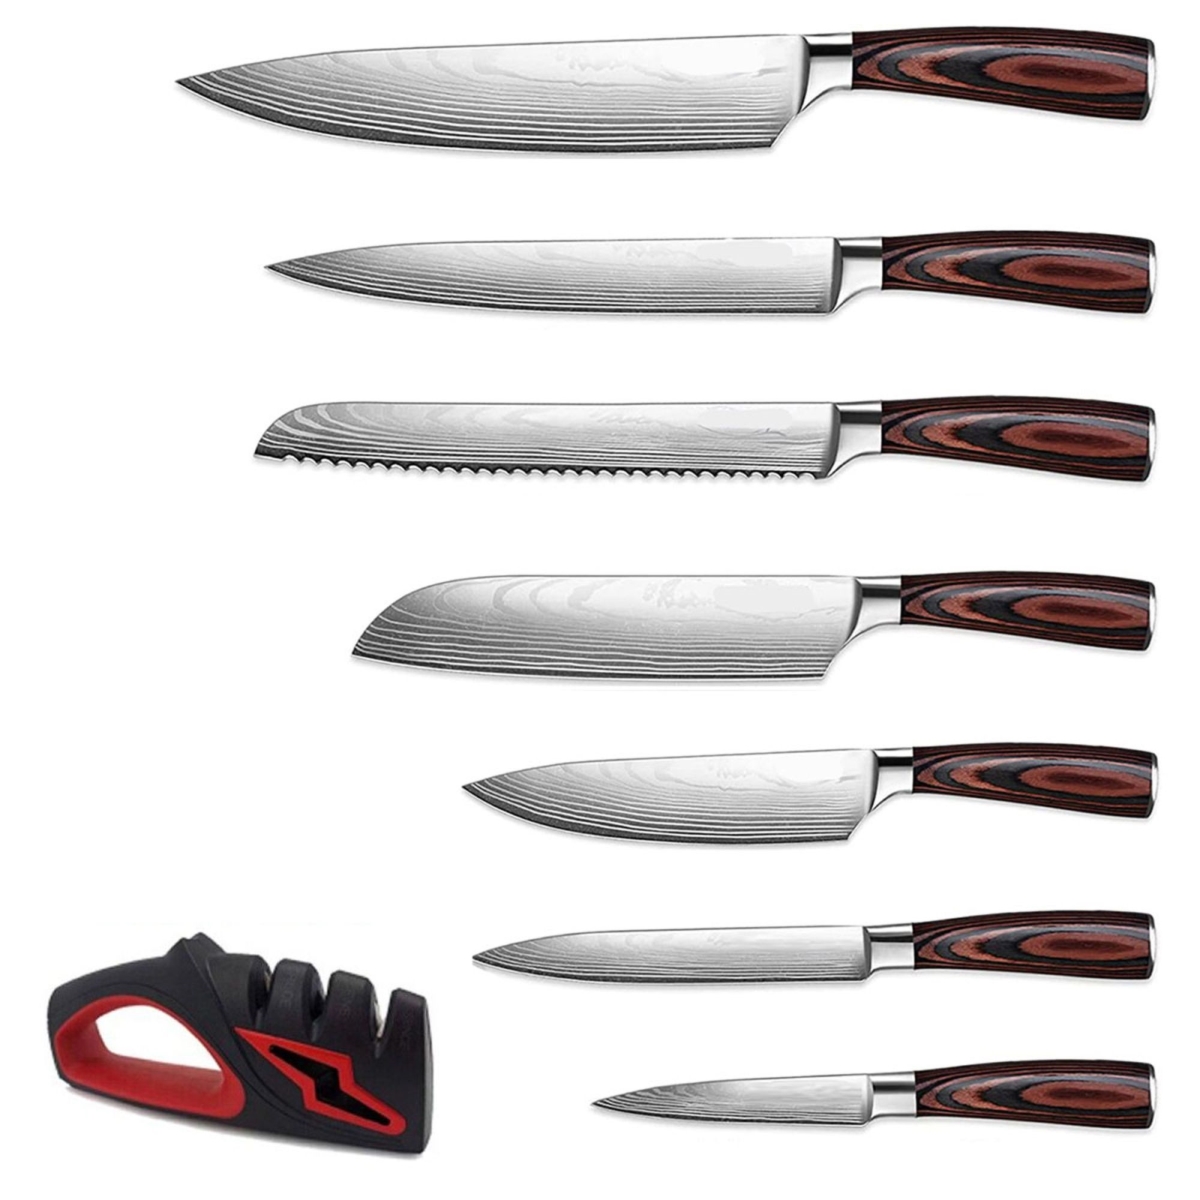 Picture of WOWMTN KNIFE7 7-Piece High Carbon Steel Knife Set with Knife Sharpener